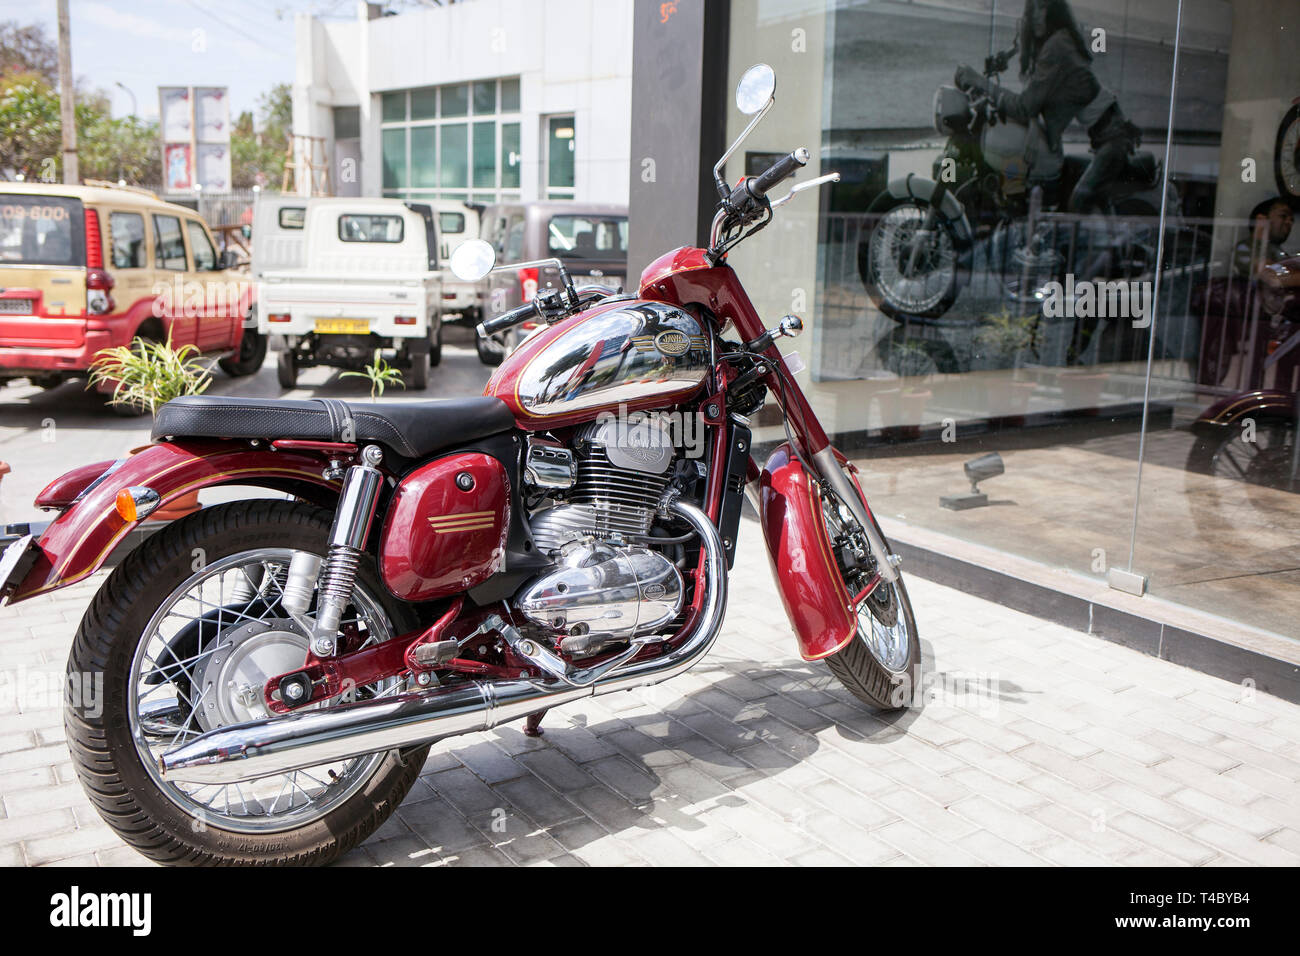 Jawa showroom in Jaipur, India on March 17, 2019. Java was founded in 1929  in former Czechoslovakia and quickly became a legendary motorbike exported  worldwide. Jawa Moto s.r.o. has headquarters in Tynec